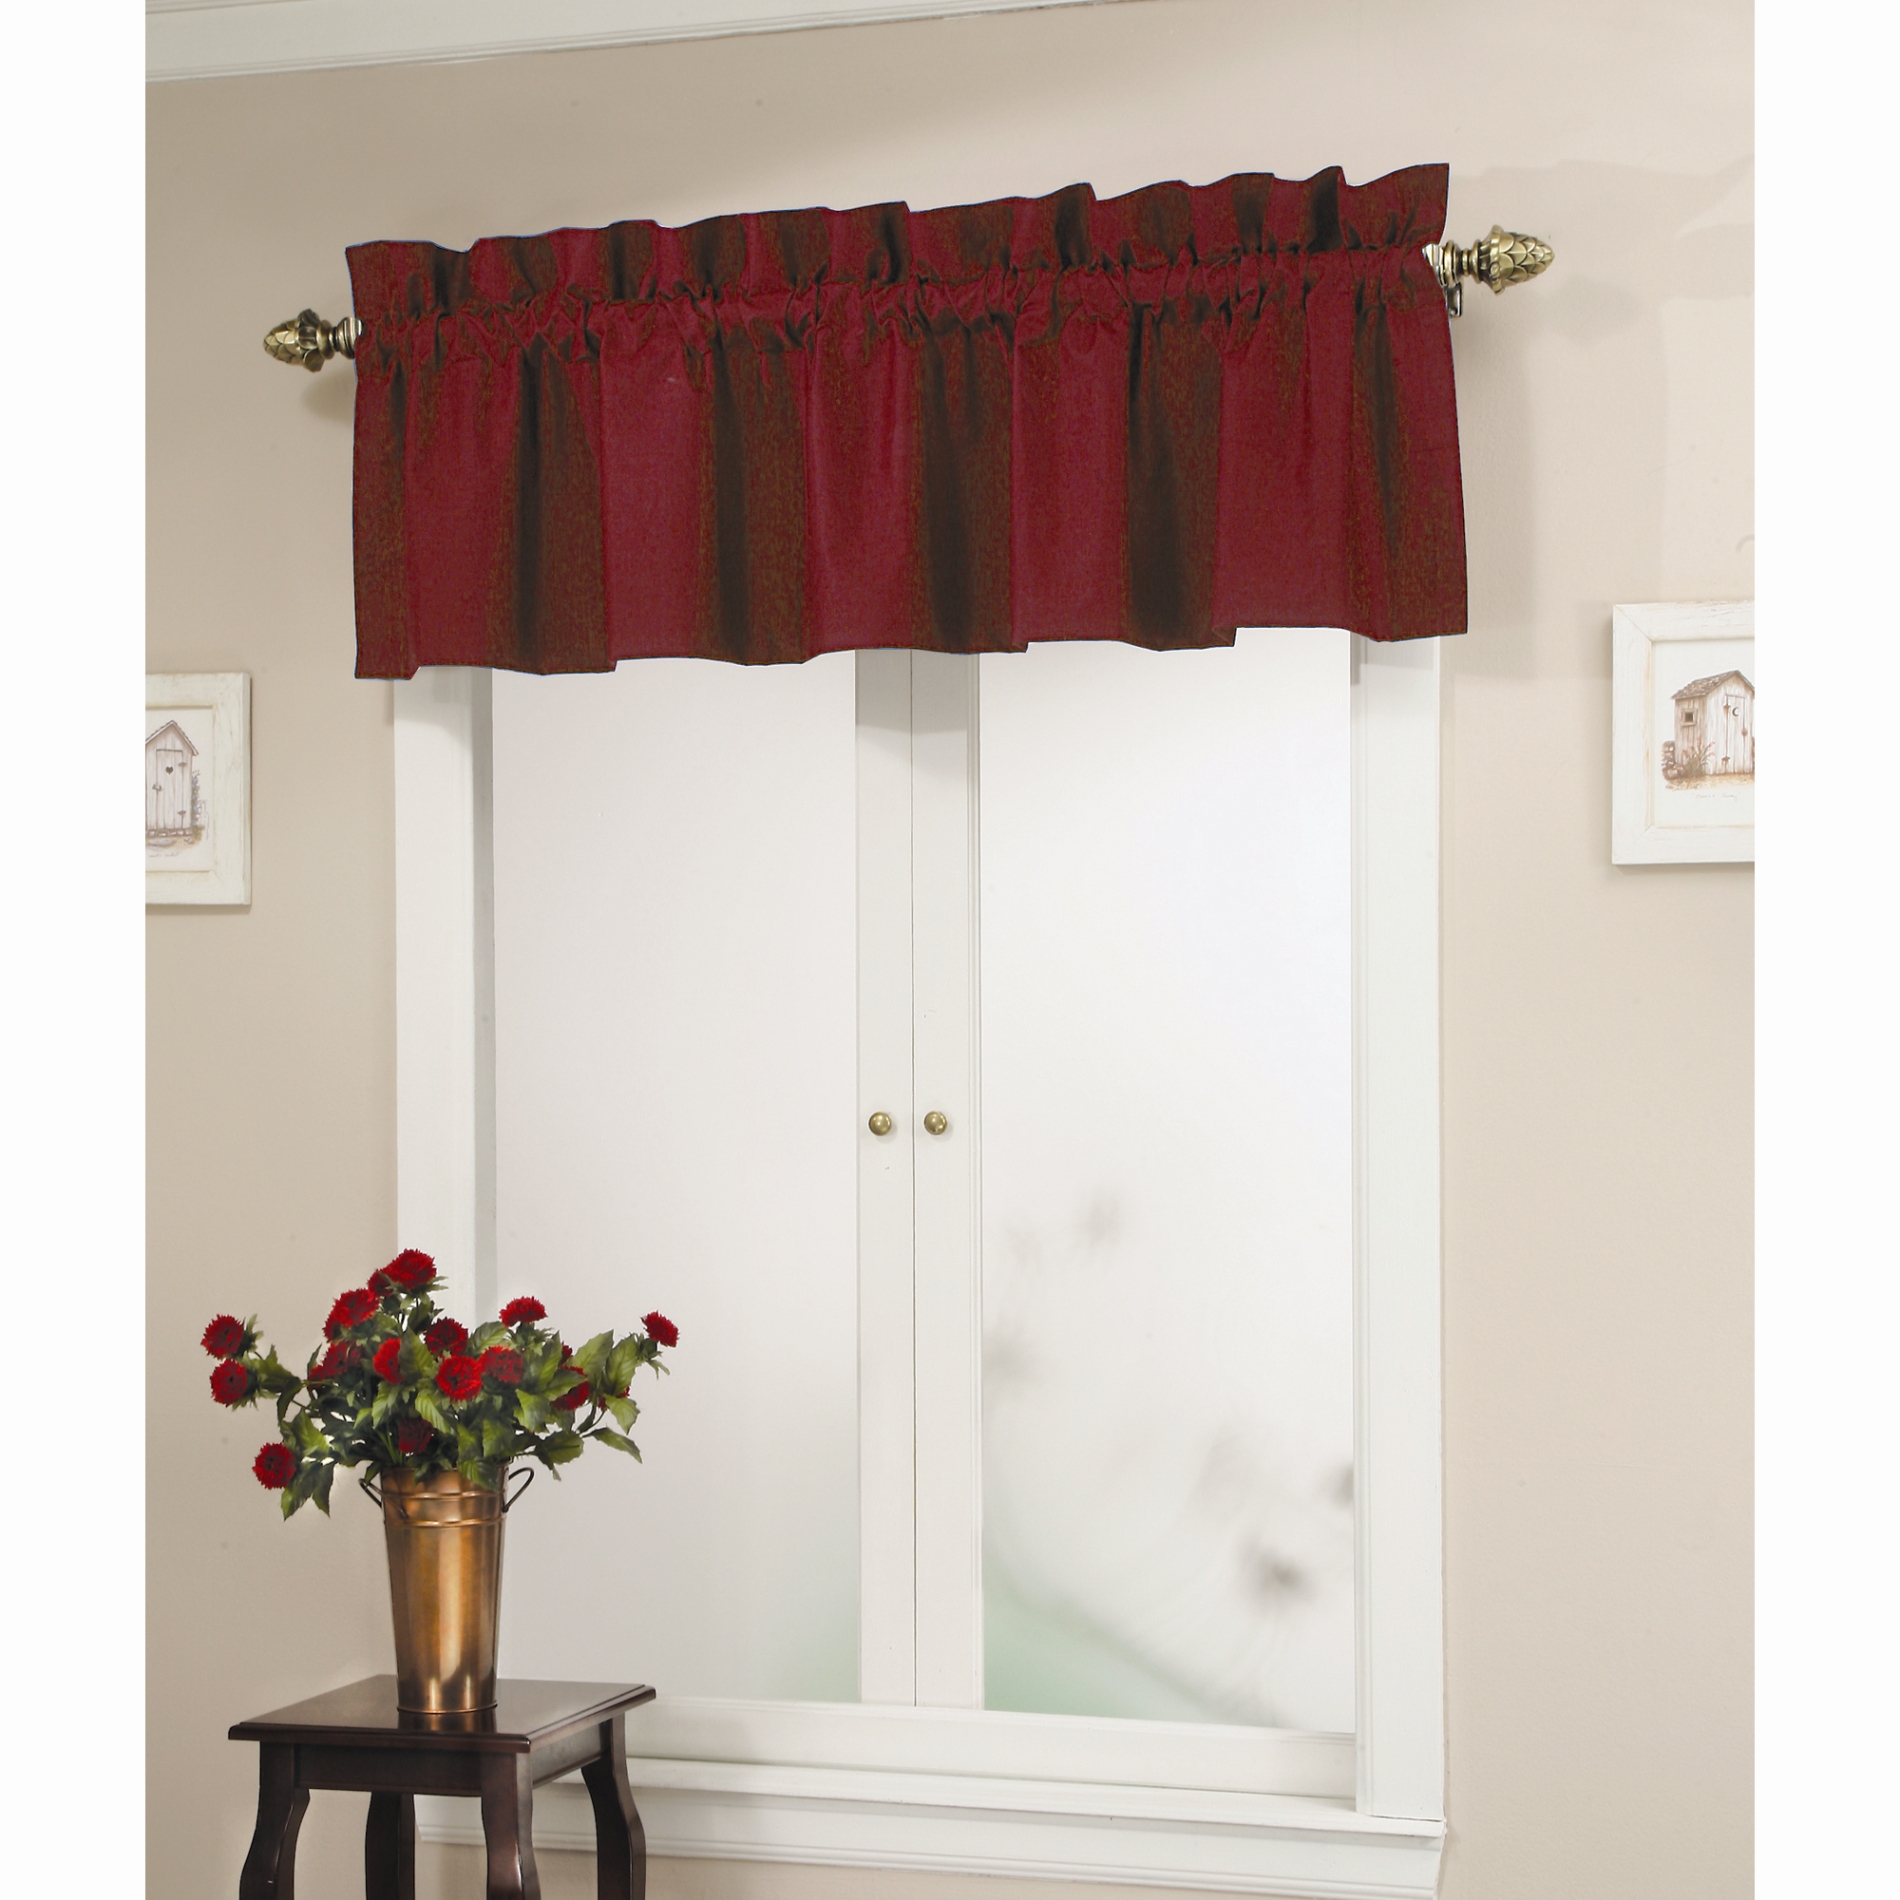 Top It Off Window Valance - Solid